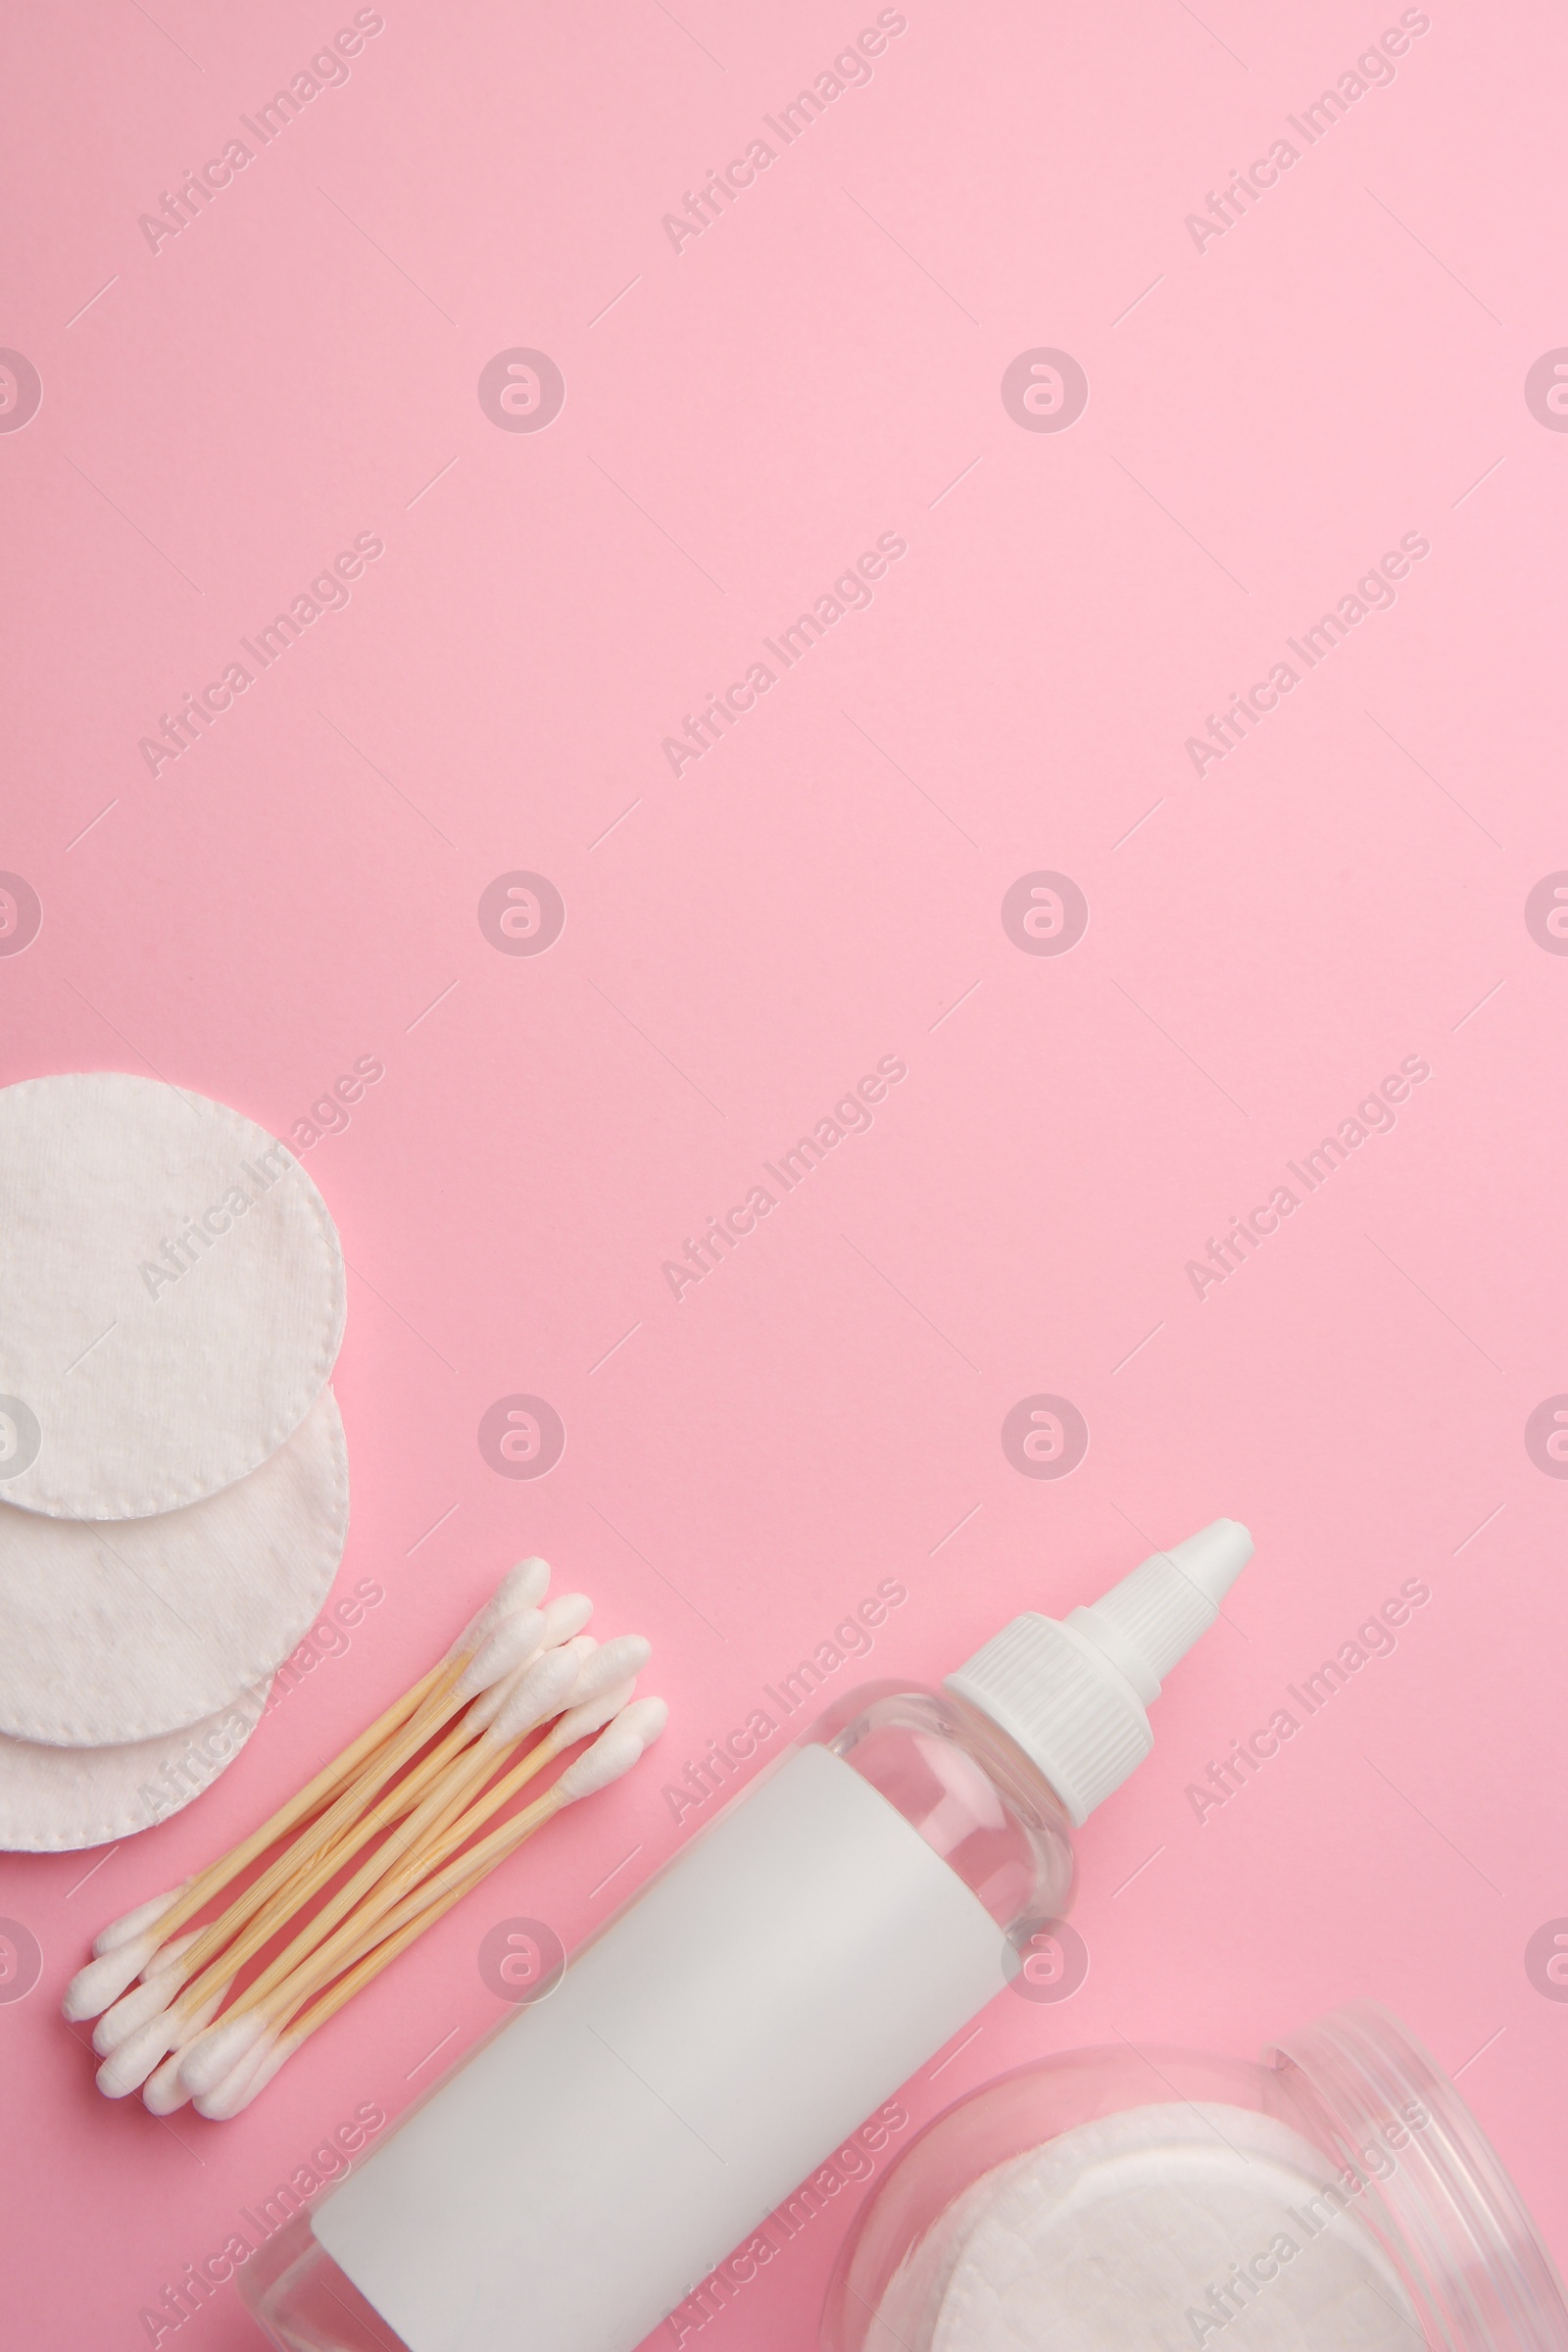 Photo of Bottle of makeup remover, cotton pads and swabs on pink background, flat lay. Space for text